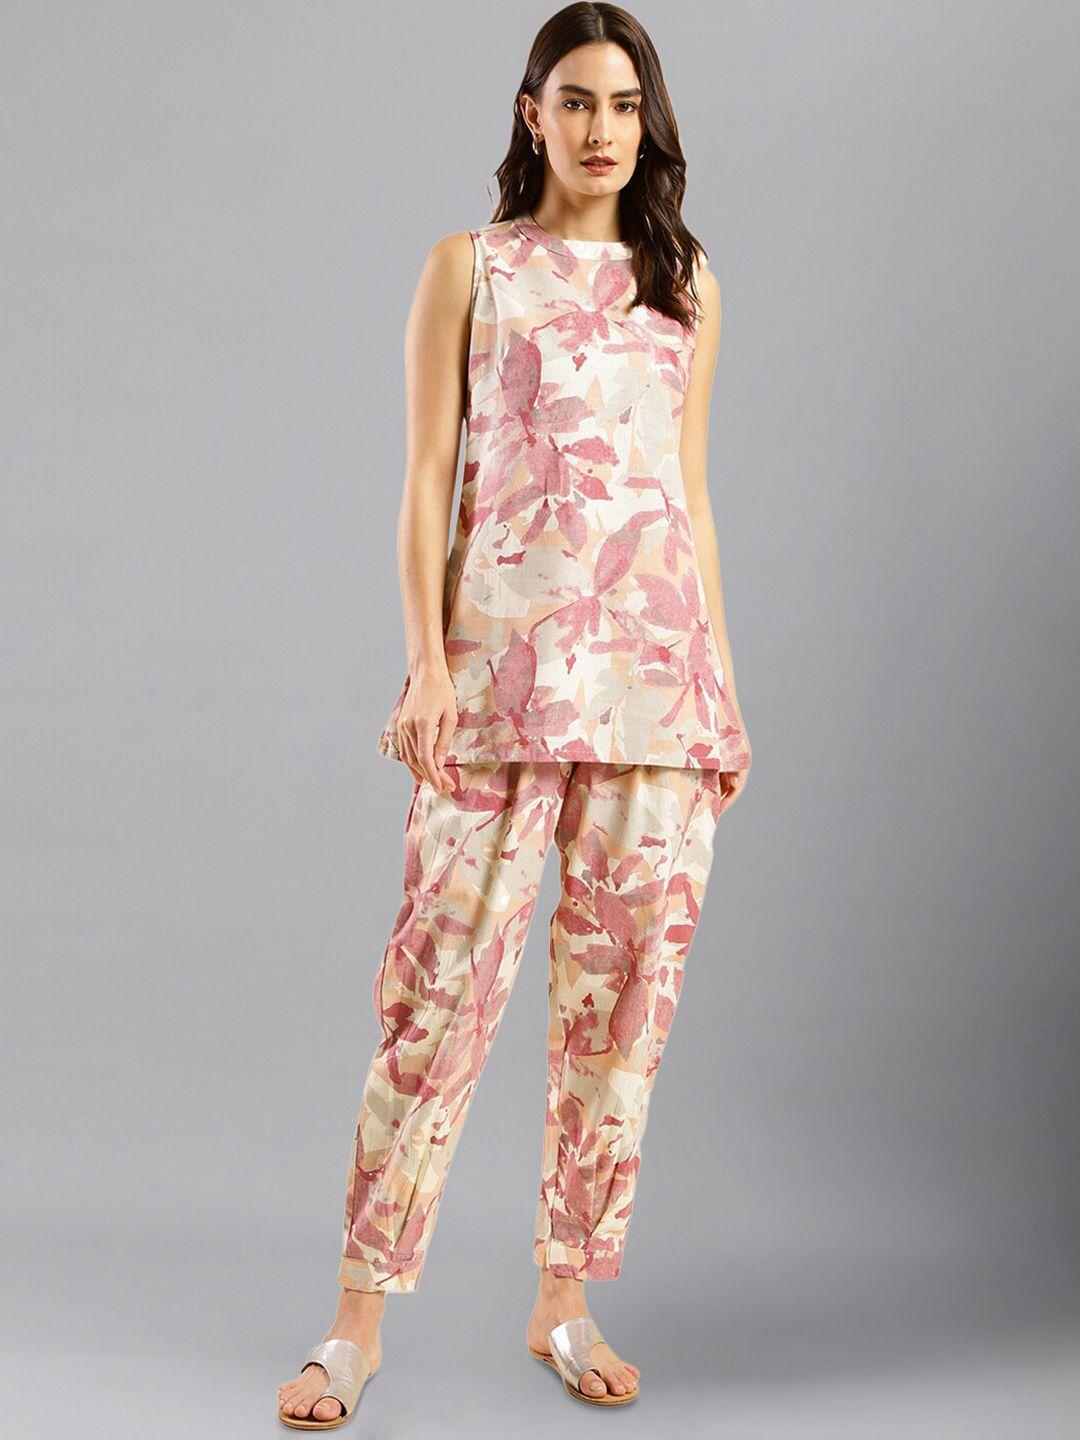 here&now floral printed pure cotton top & trousers